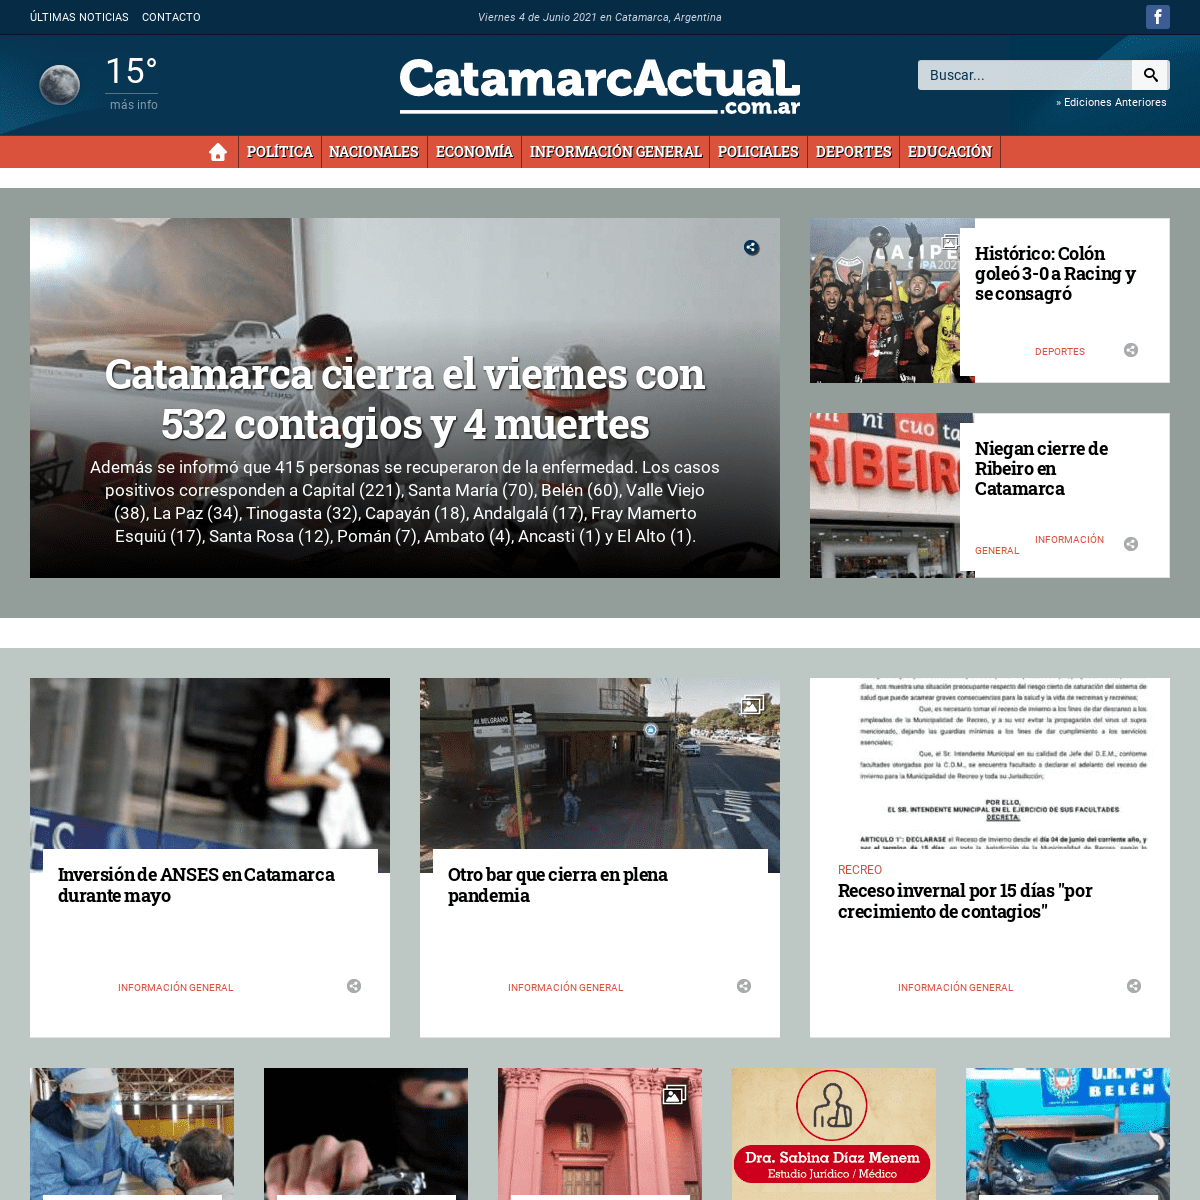 A complete backup of https://catamarcactual.com.ar